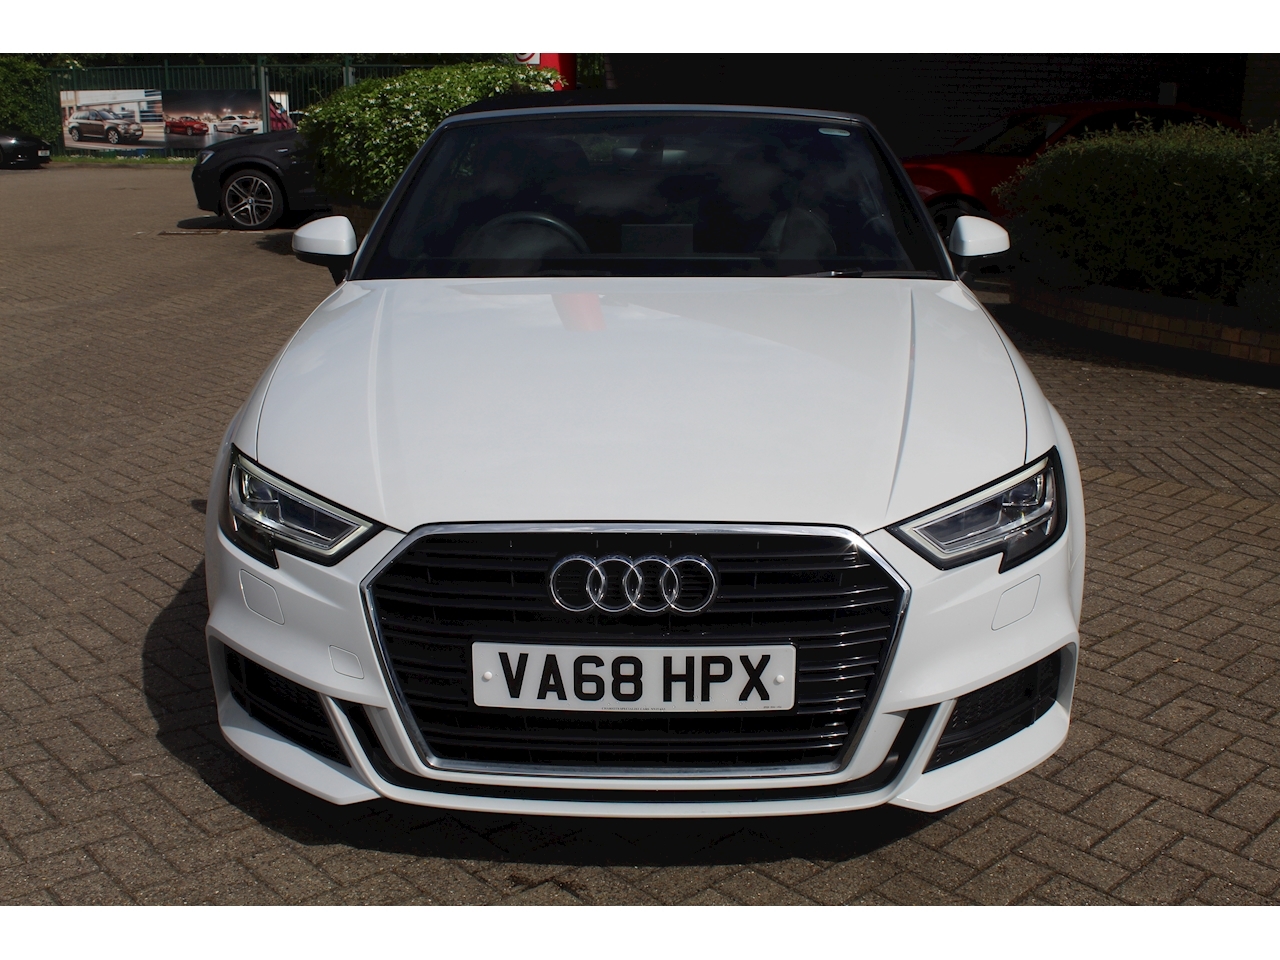 1.5 TFSI CoD 35 S line Cabriolet 2dr Petrol Manual (s/s) (150 ps)